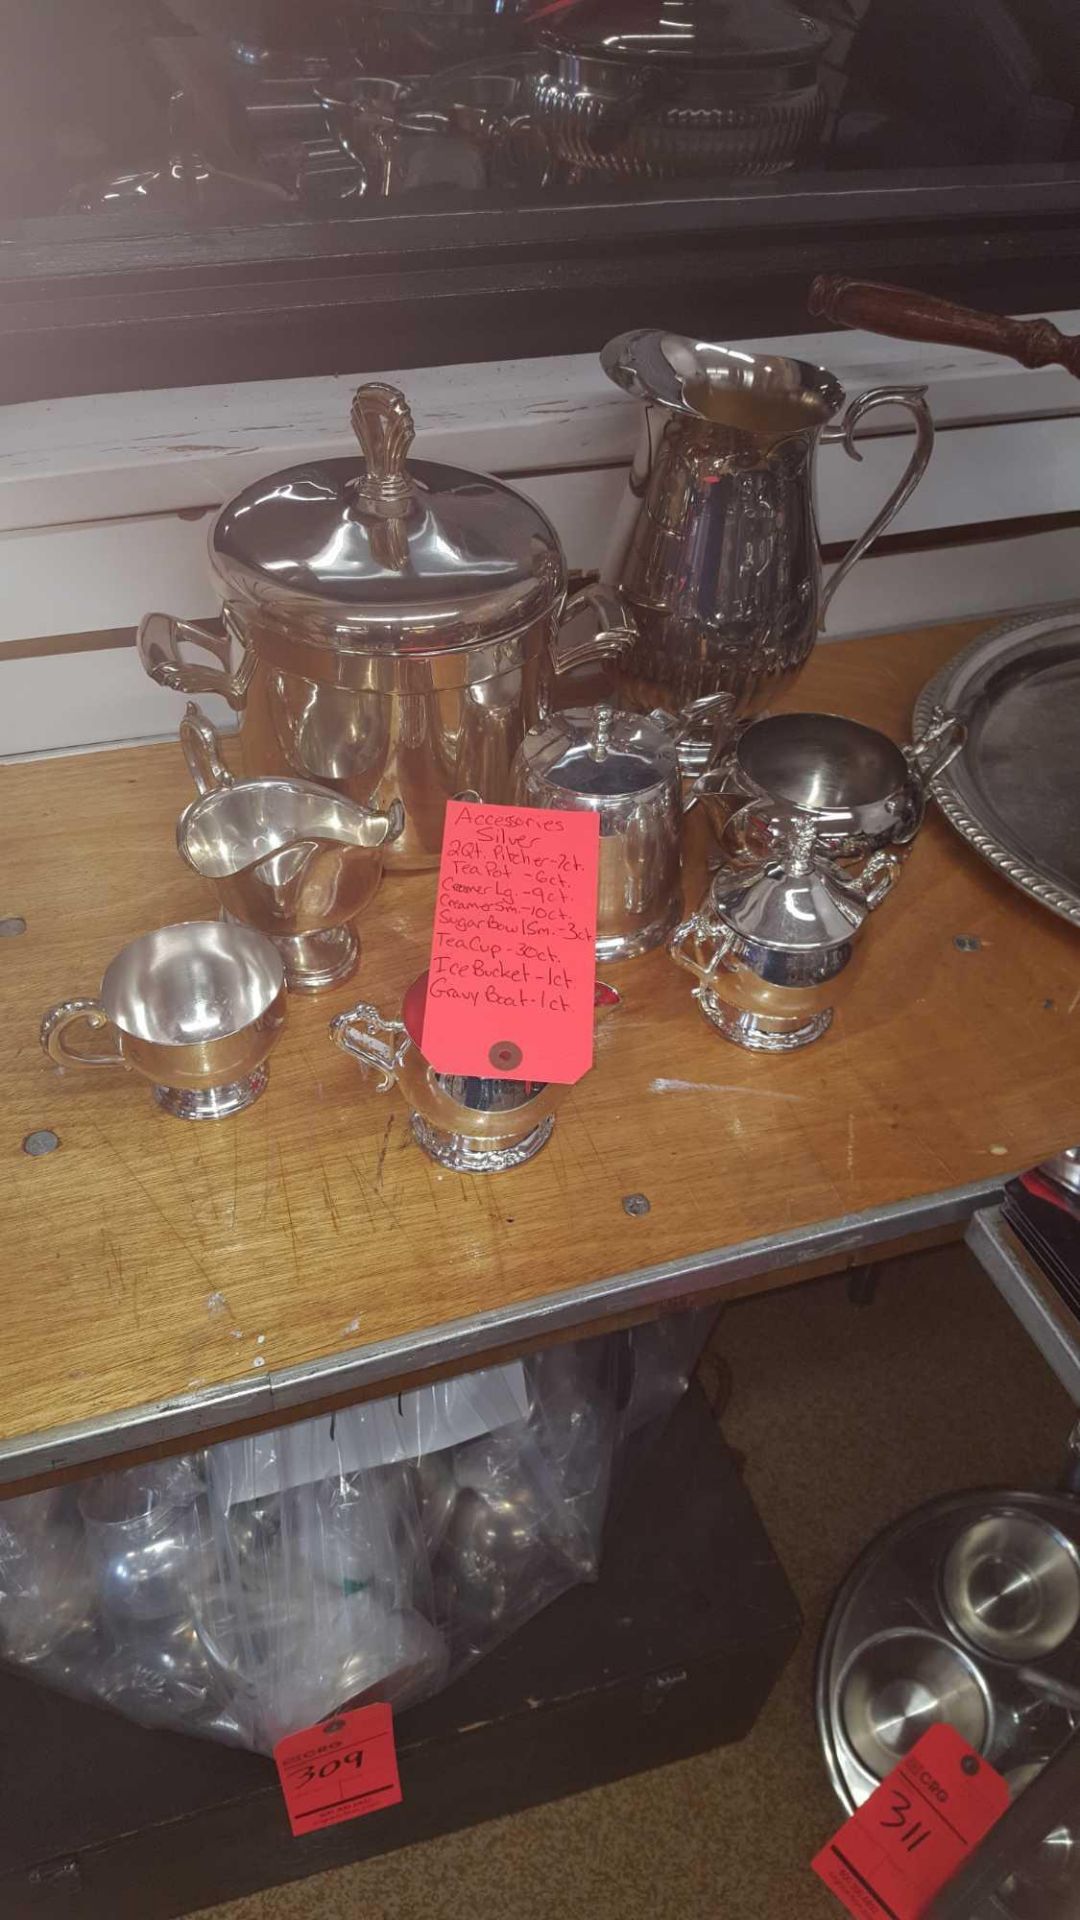 Lot of asst silver serving dishes and pitchers including (7) pitchers, (6) teapots, (9) large